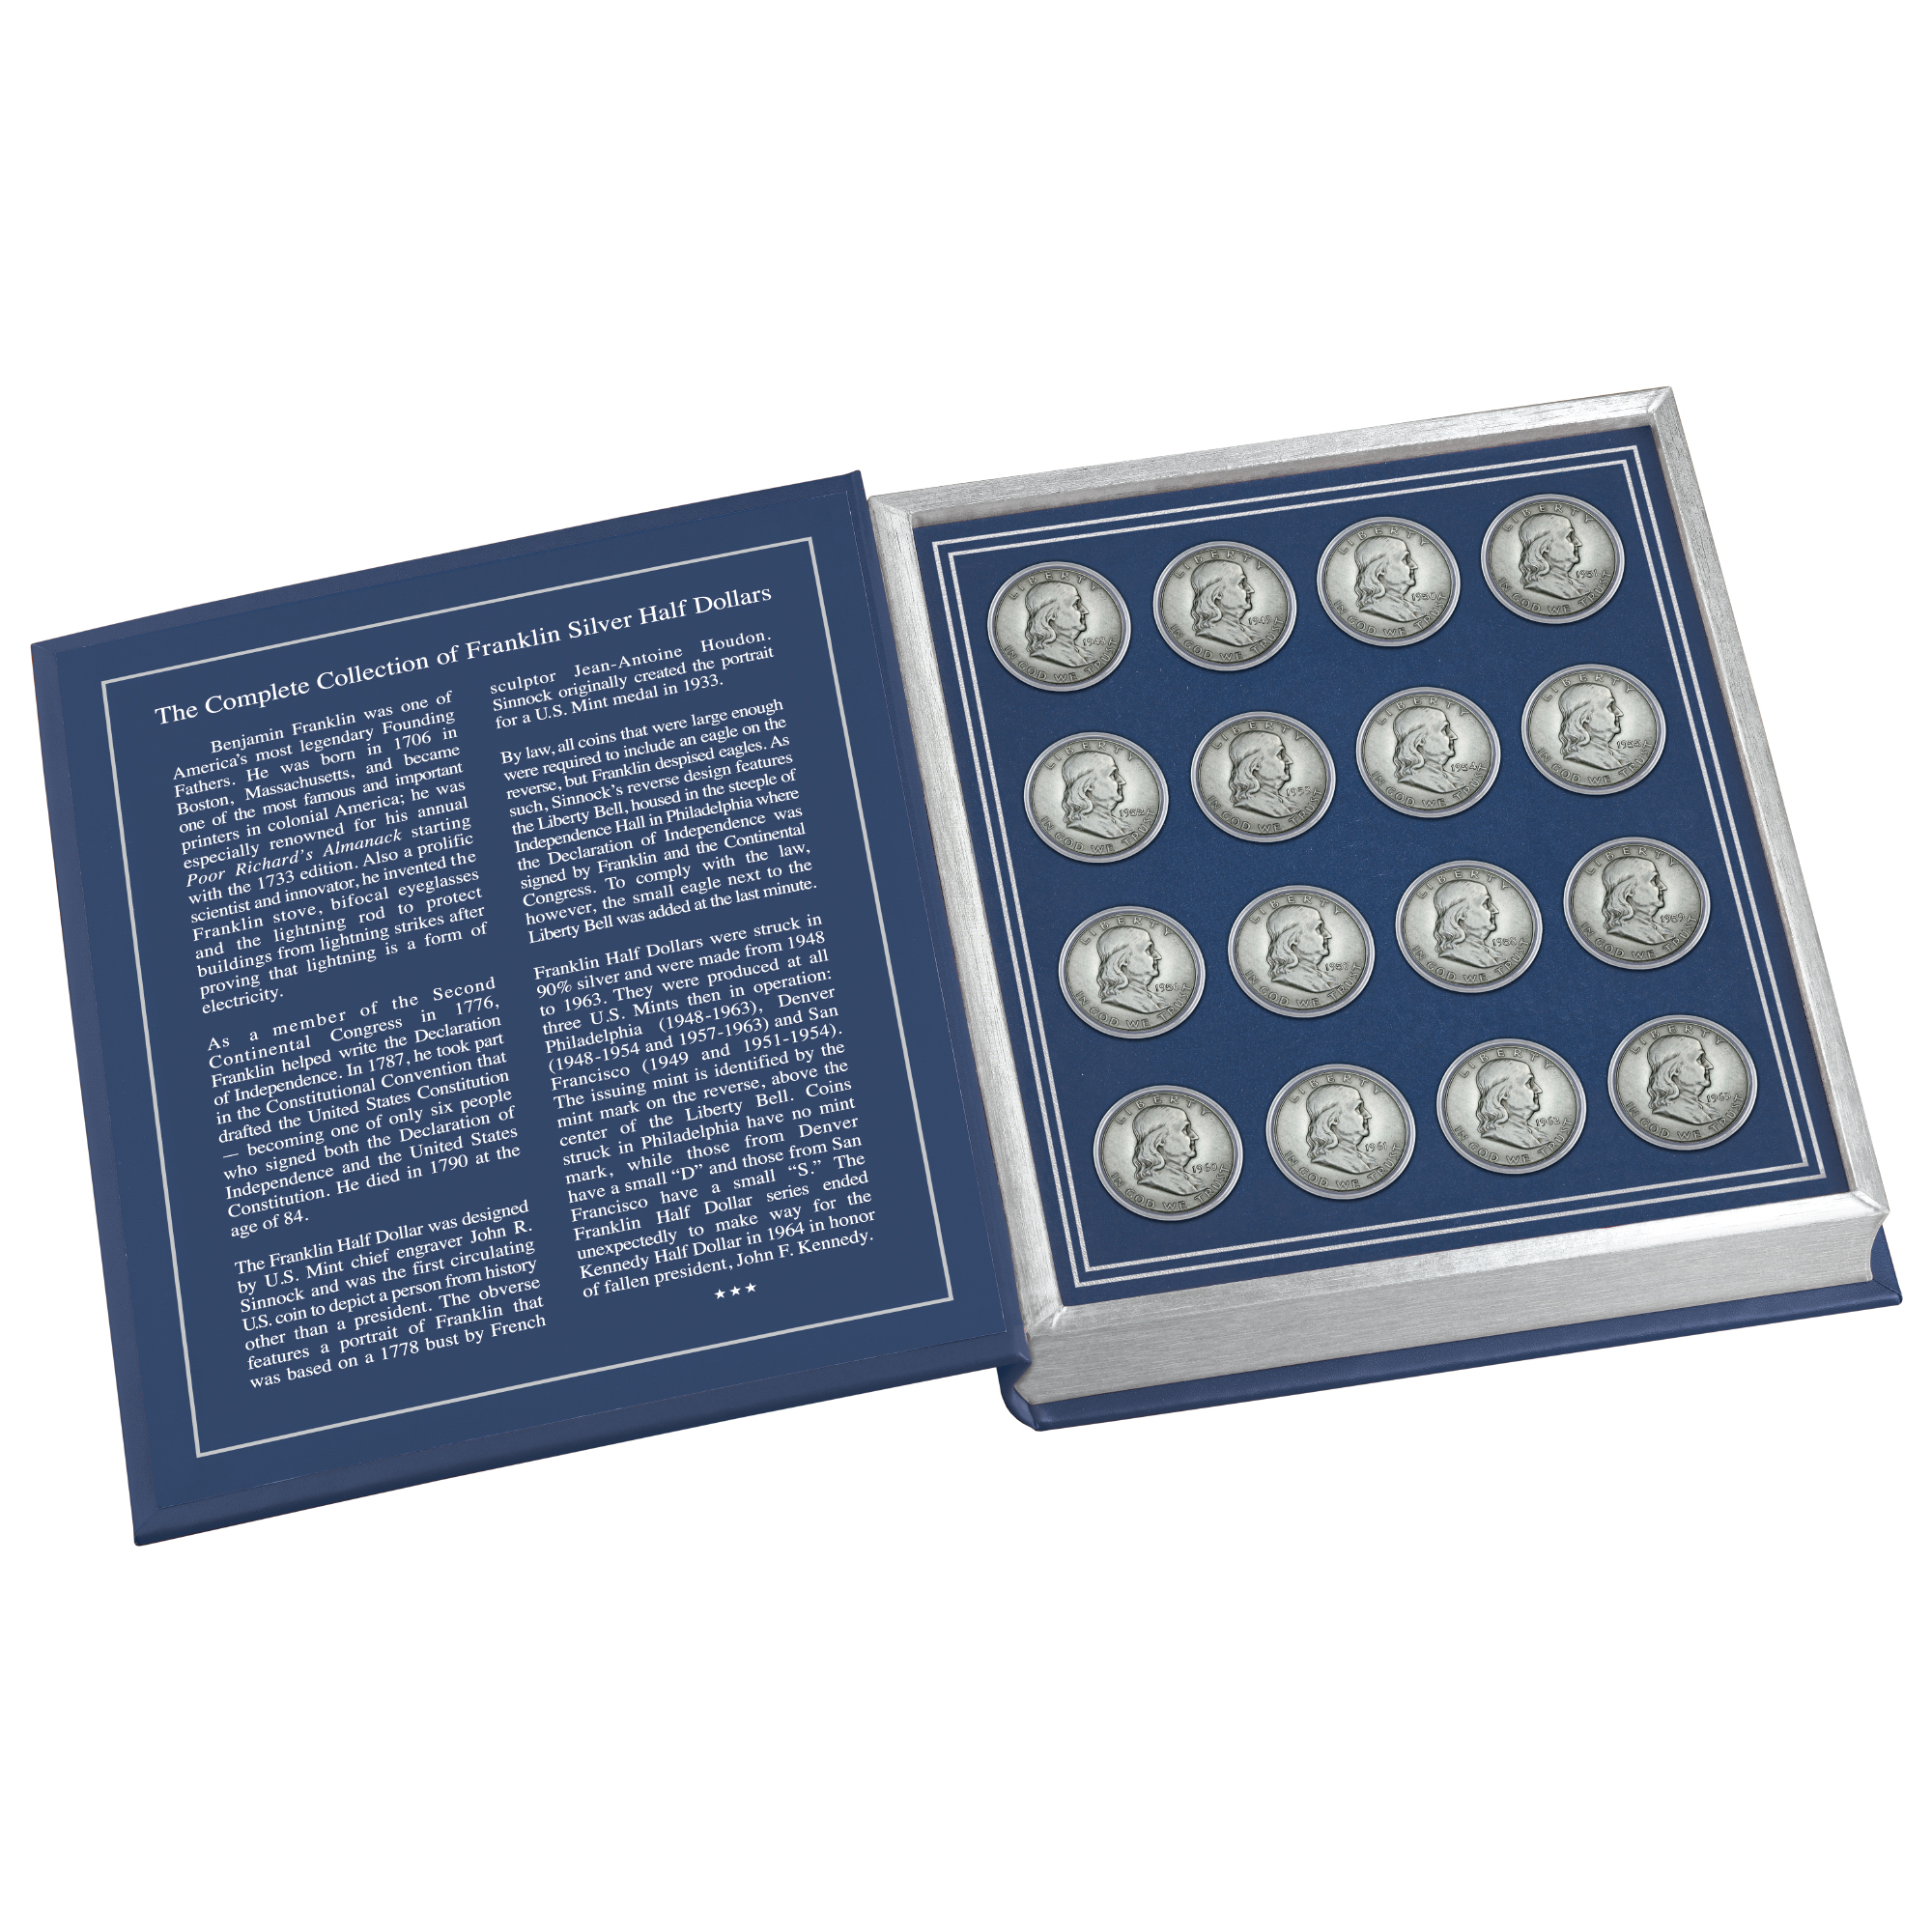 The Complete Collection of Franklin Silver Half Dollars 10821 0014 a coin